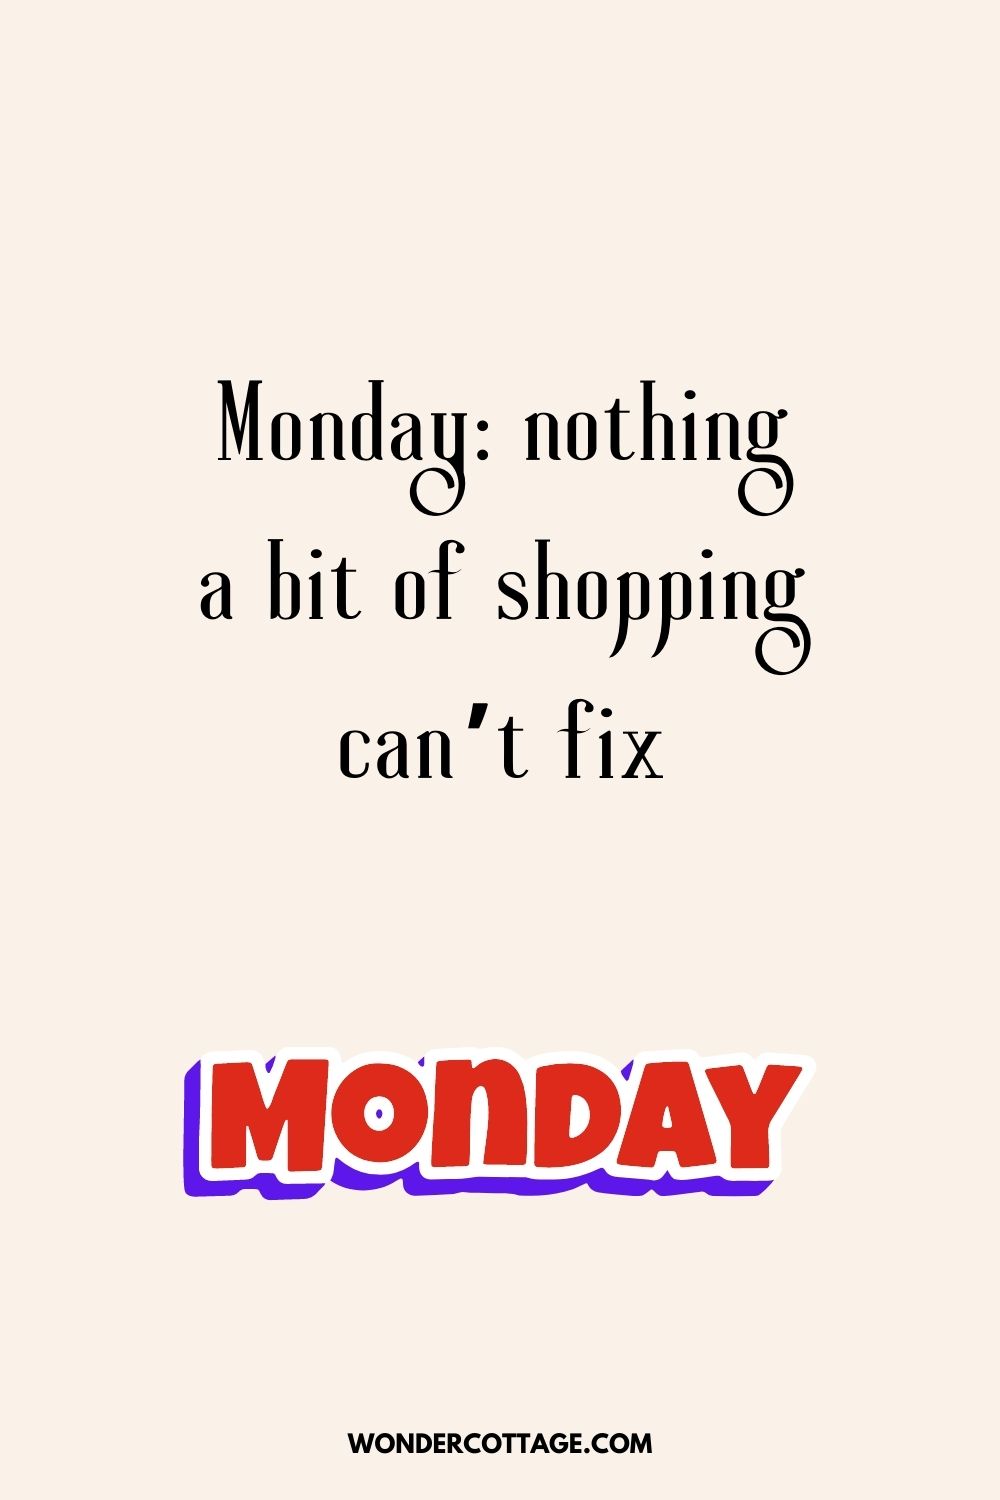 Monday: nothing a bit of shopping can’t fix